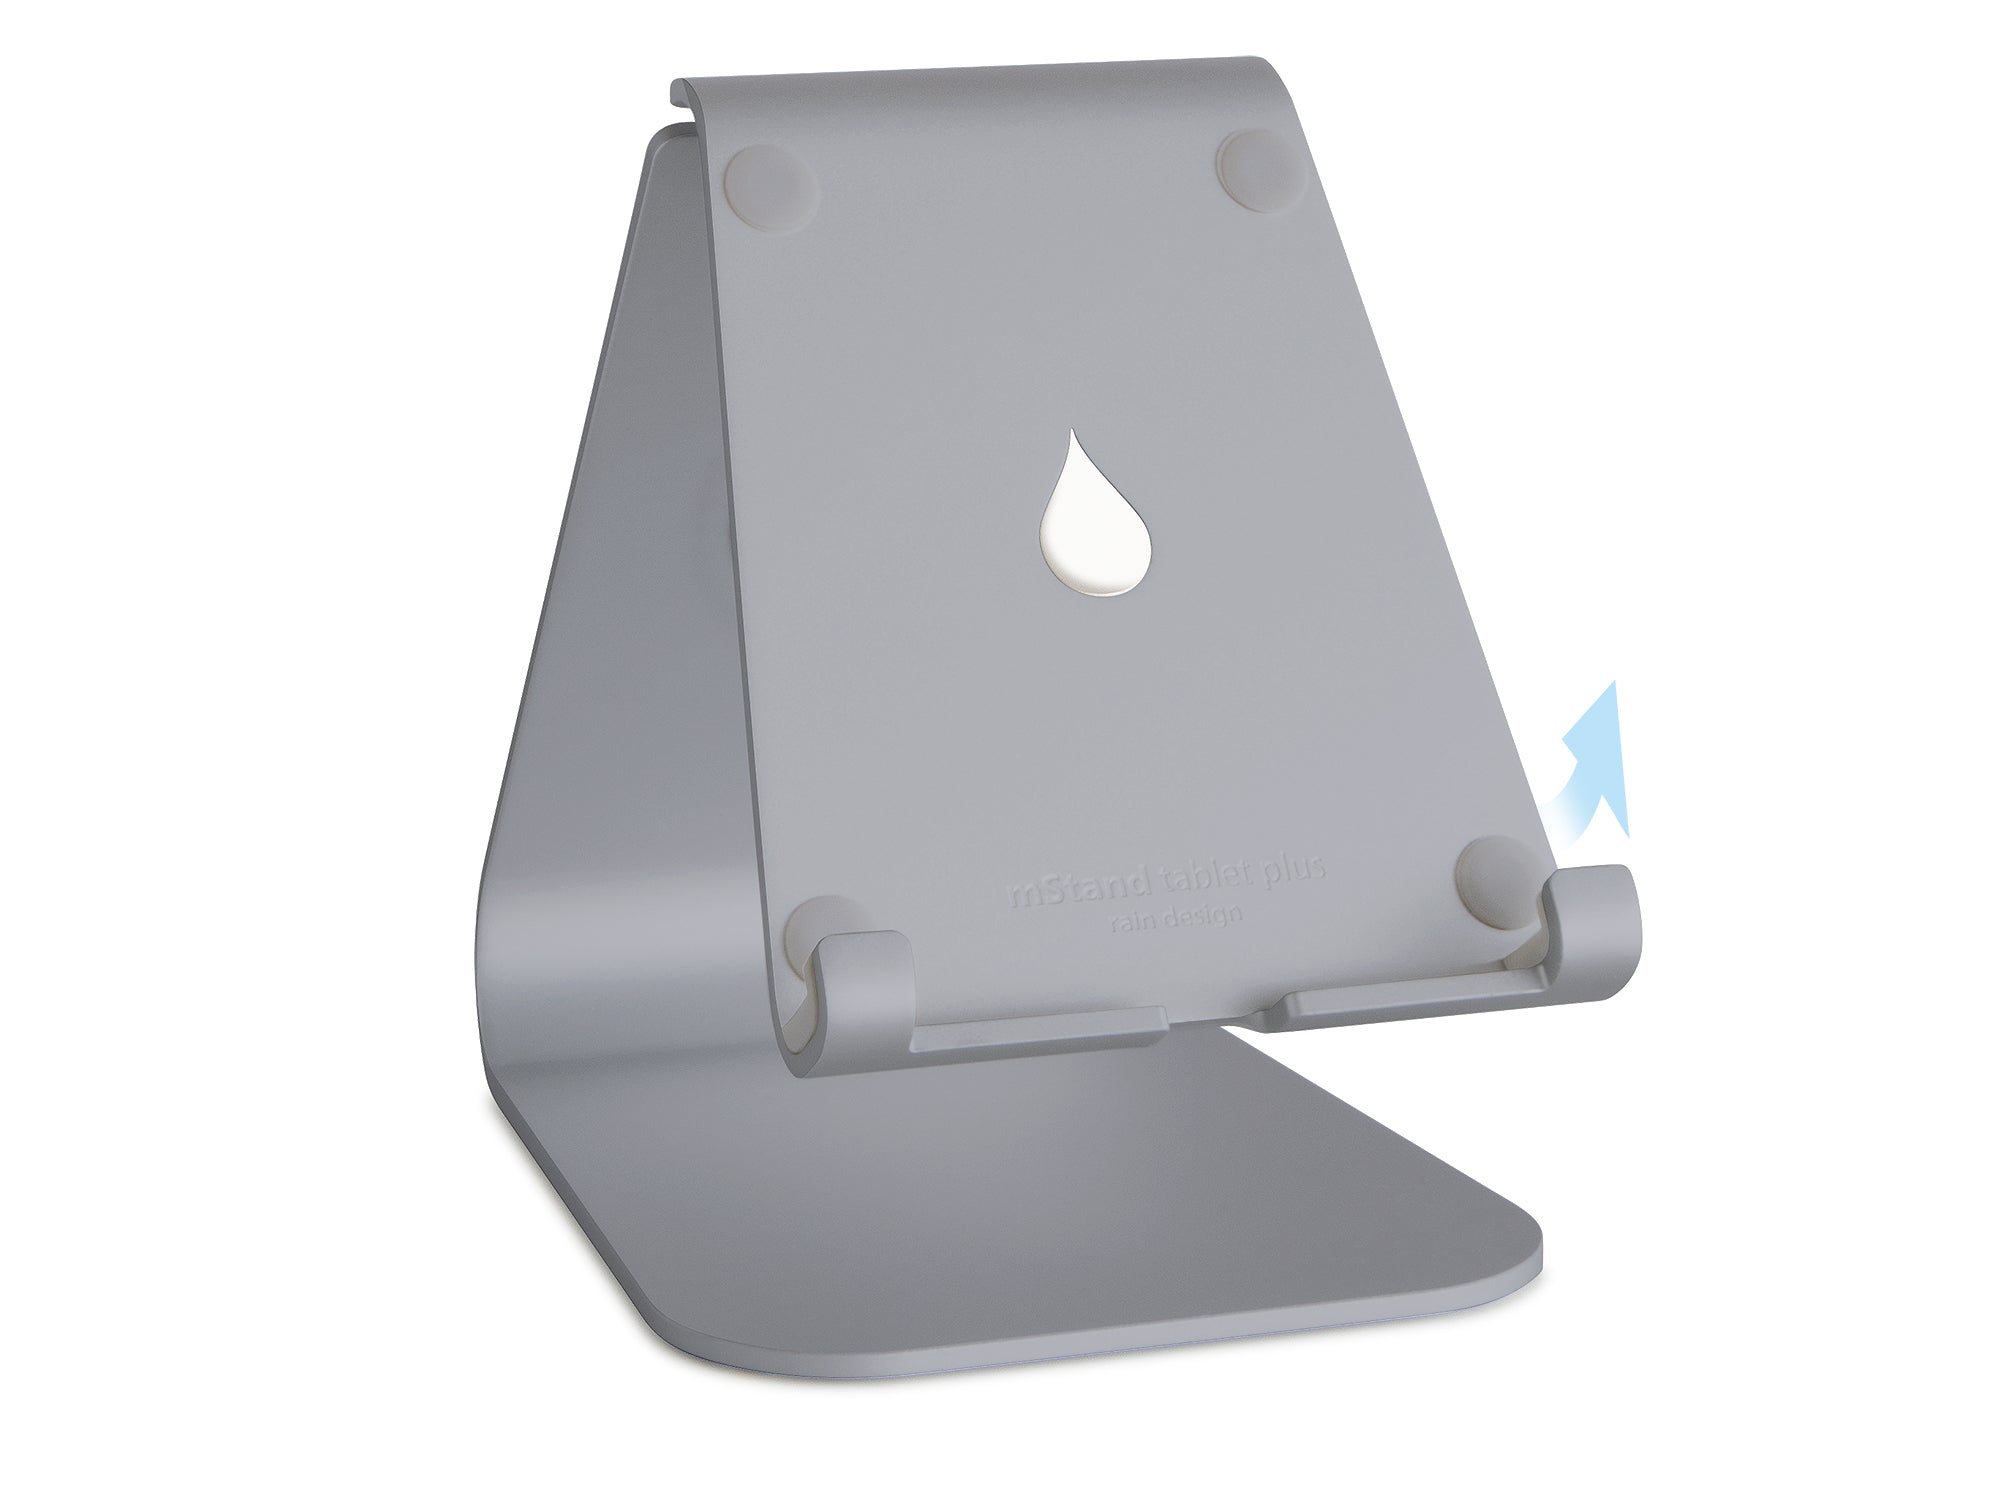 Rain Design mStand Tablet Plus for iPad Space Grey